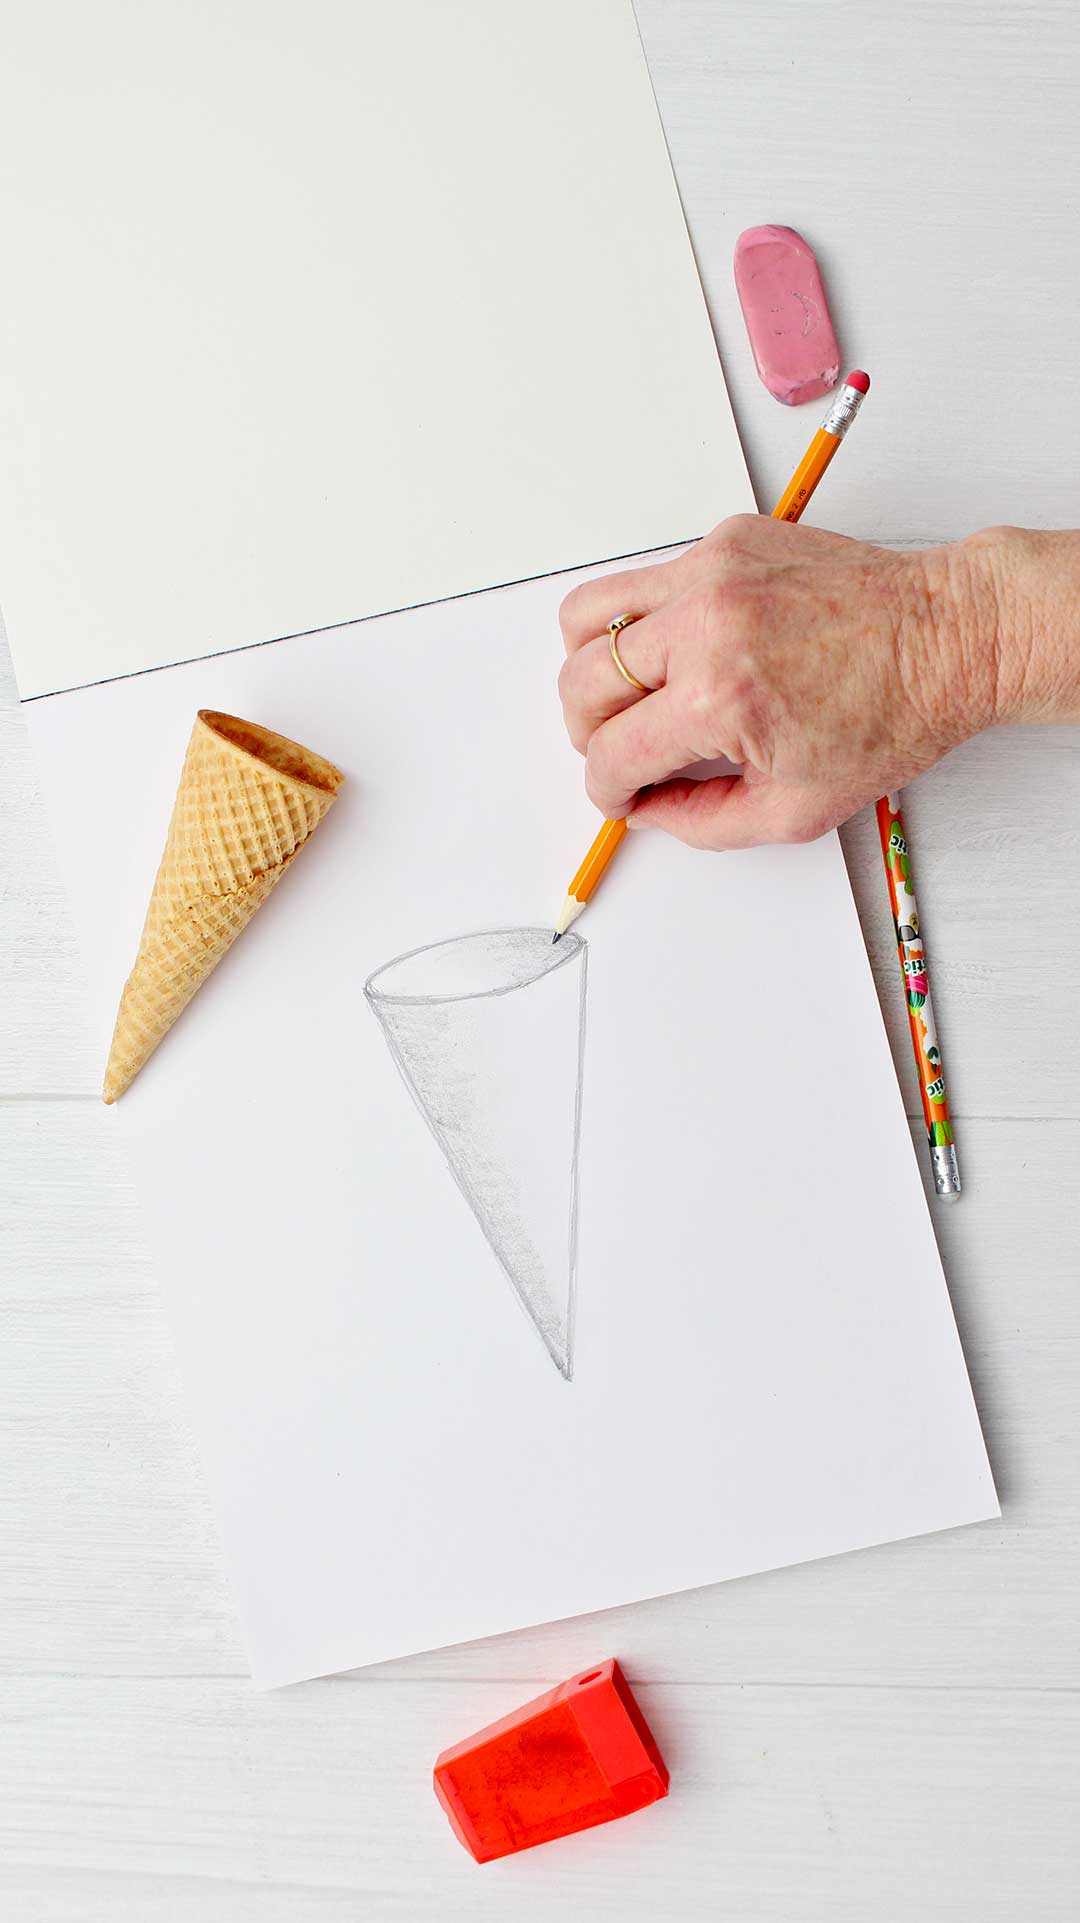 Hand shading the a sketch of a cone with an ice cream cone resting on paper.